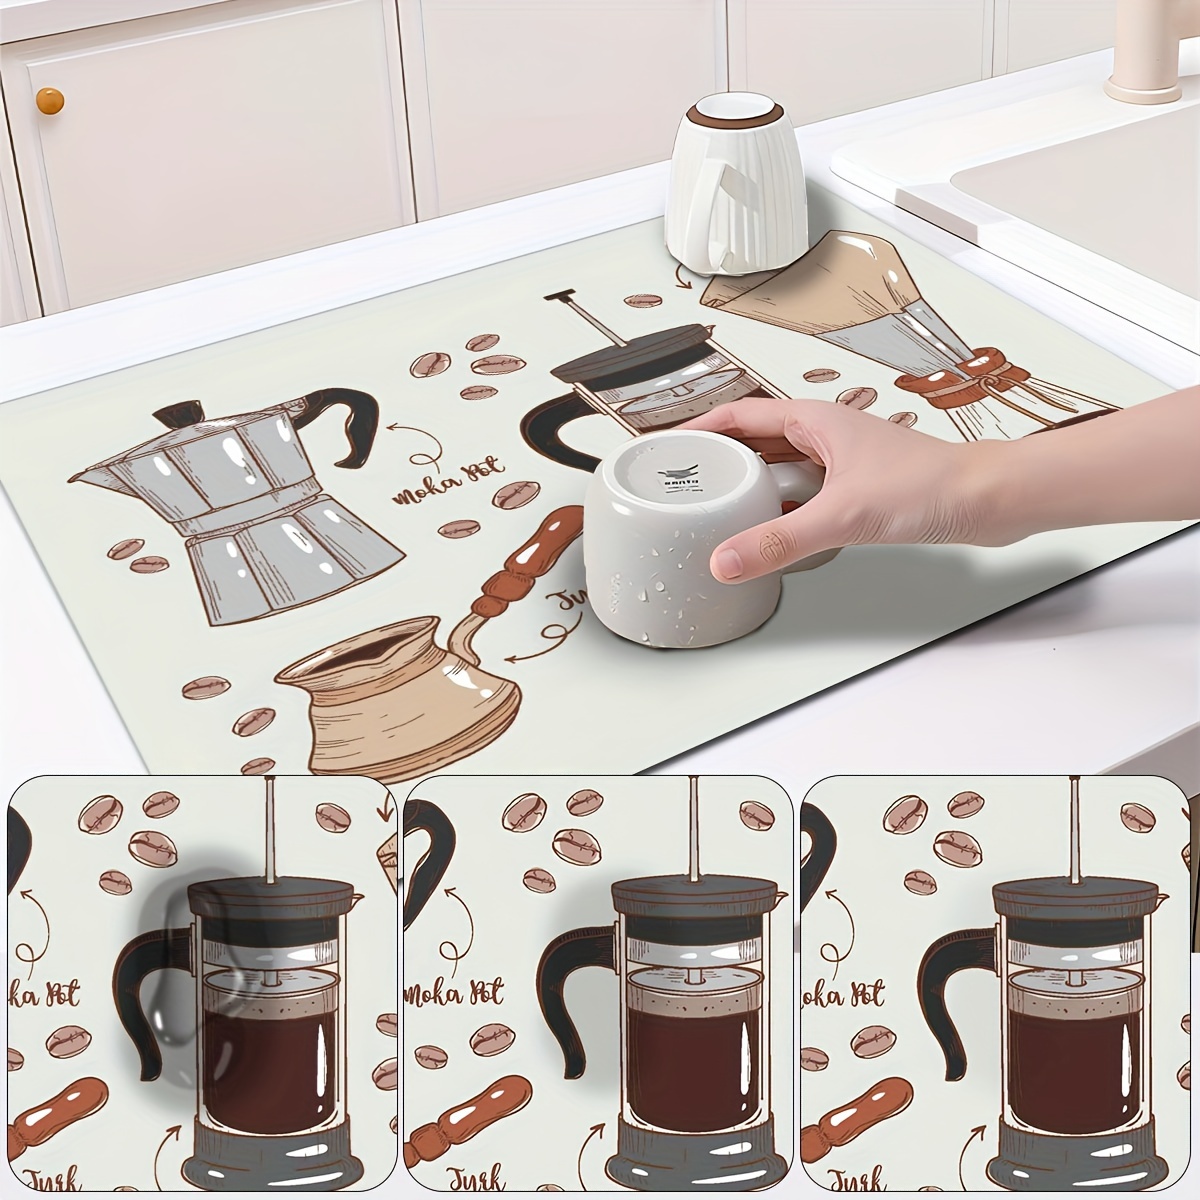 Retro Coffee Patterns, Moisture-proof Absorbent Coffee Pads